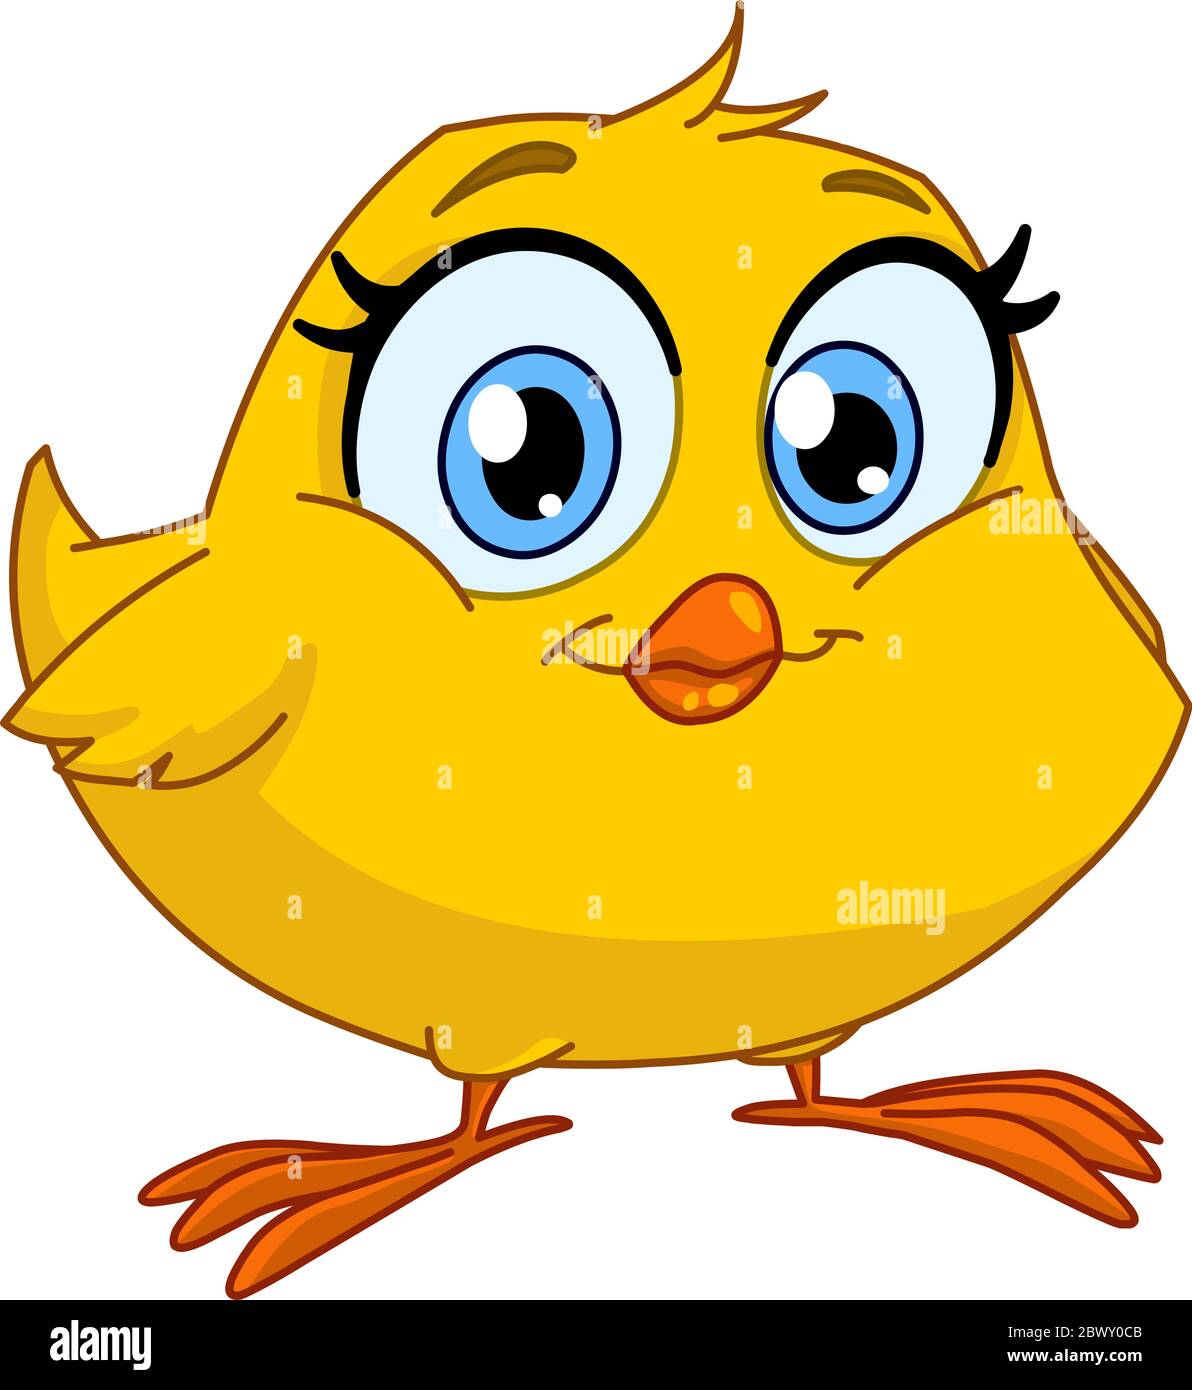 Cute smiling chick Stock Vector